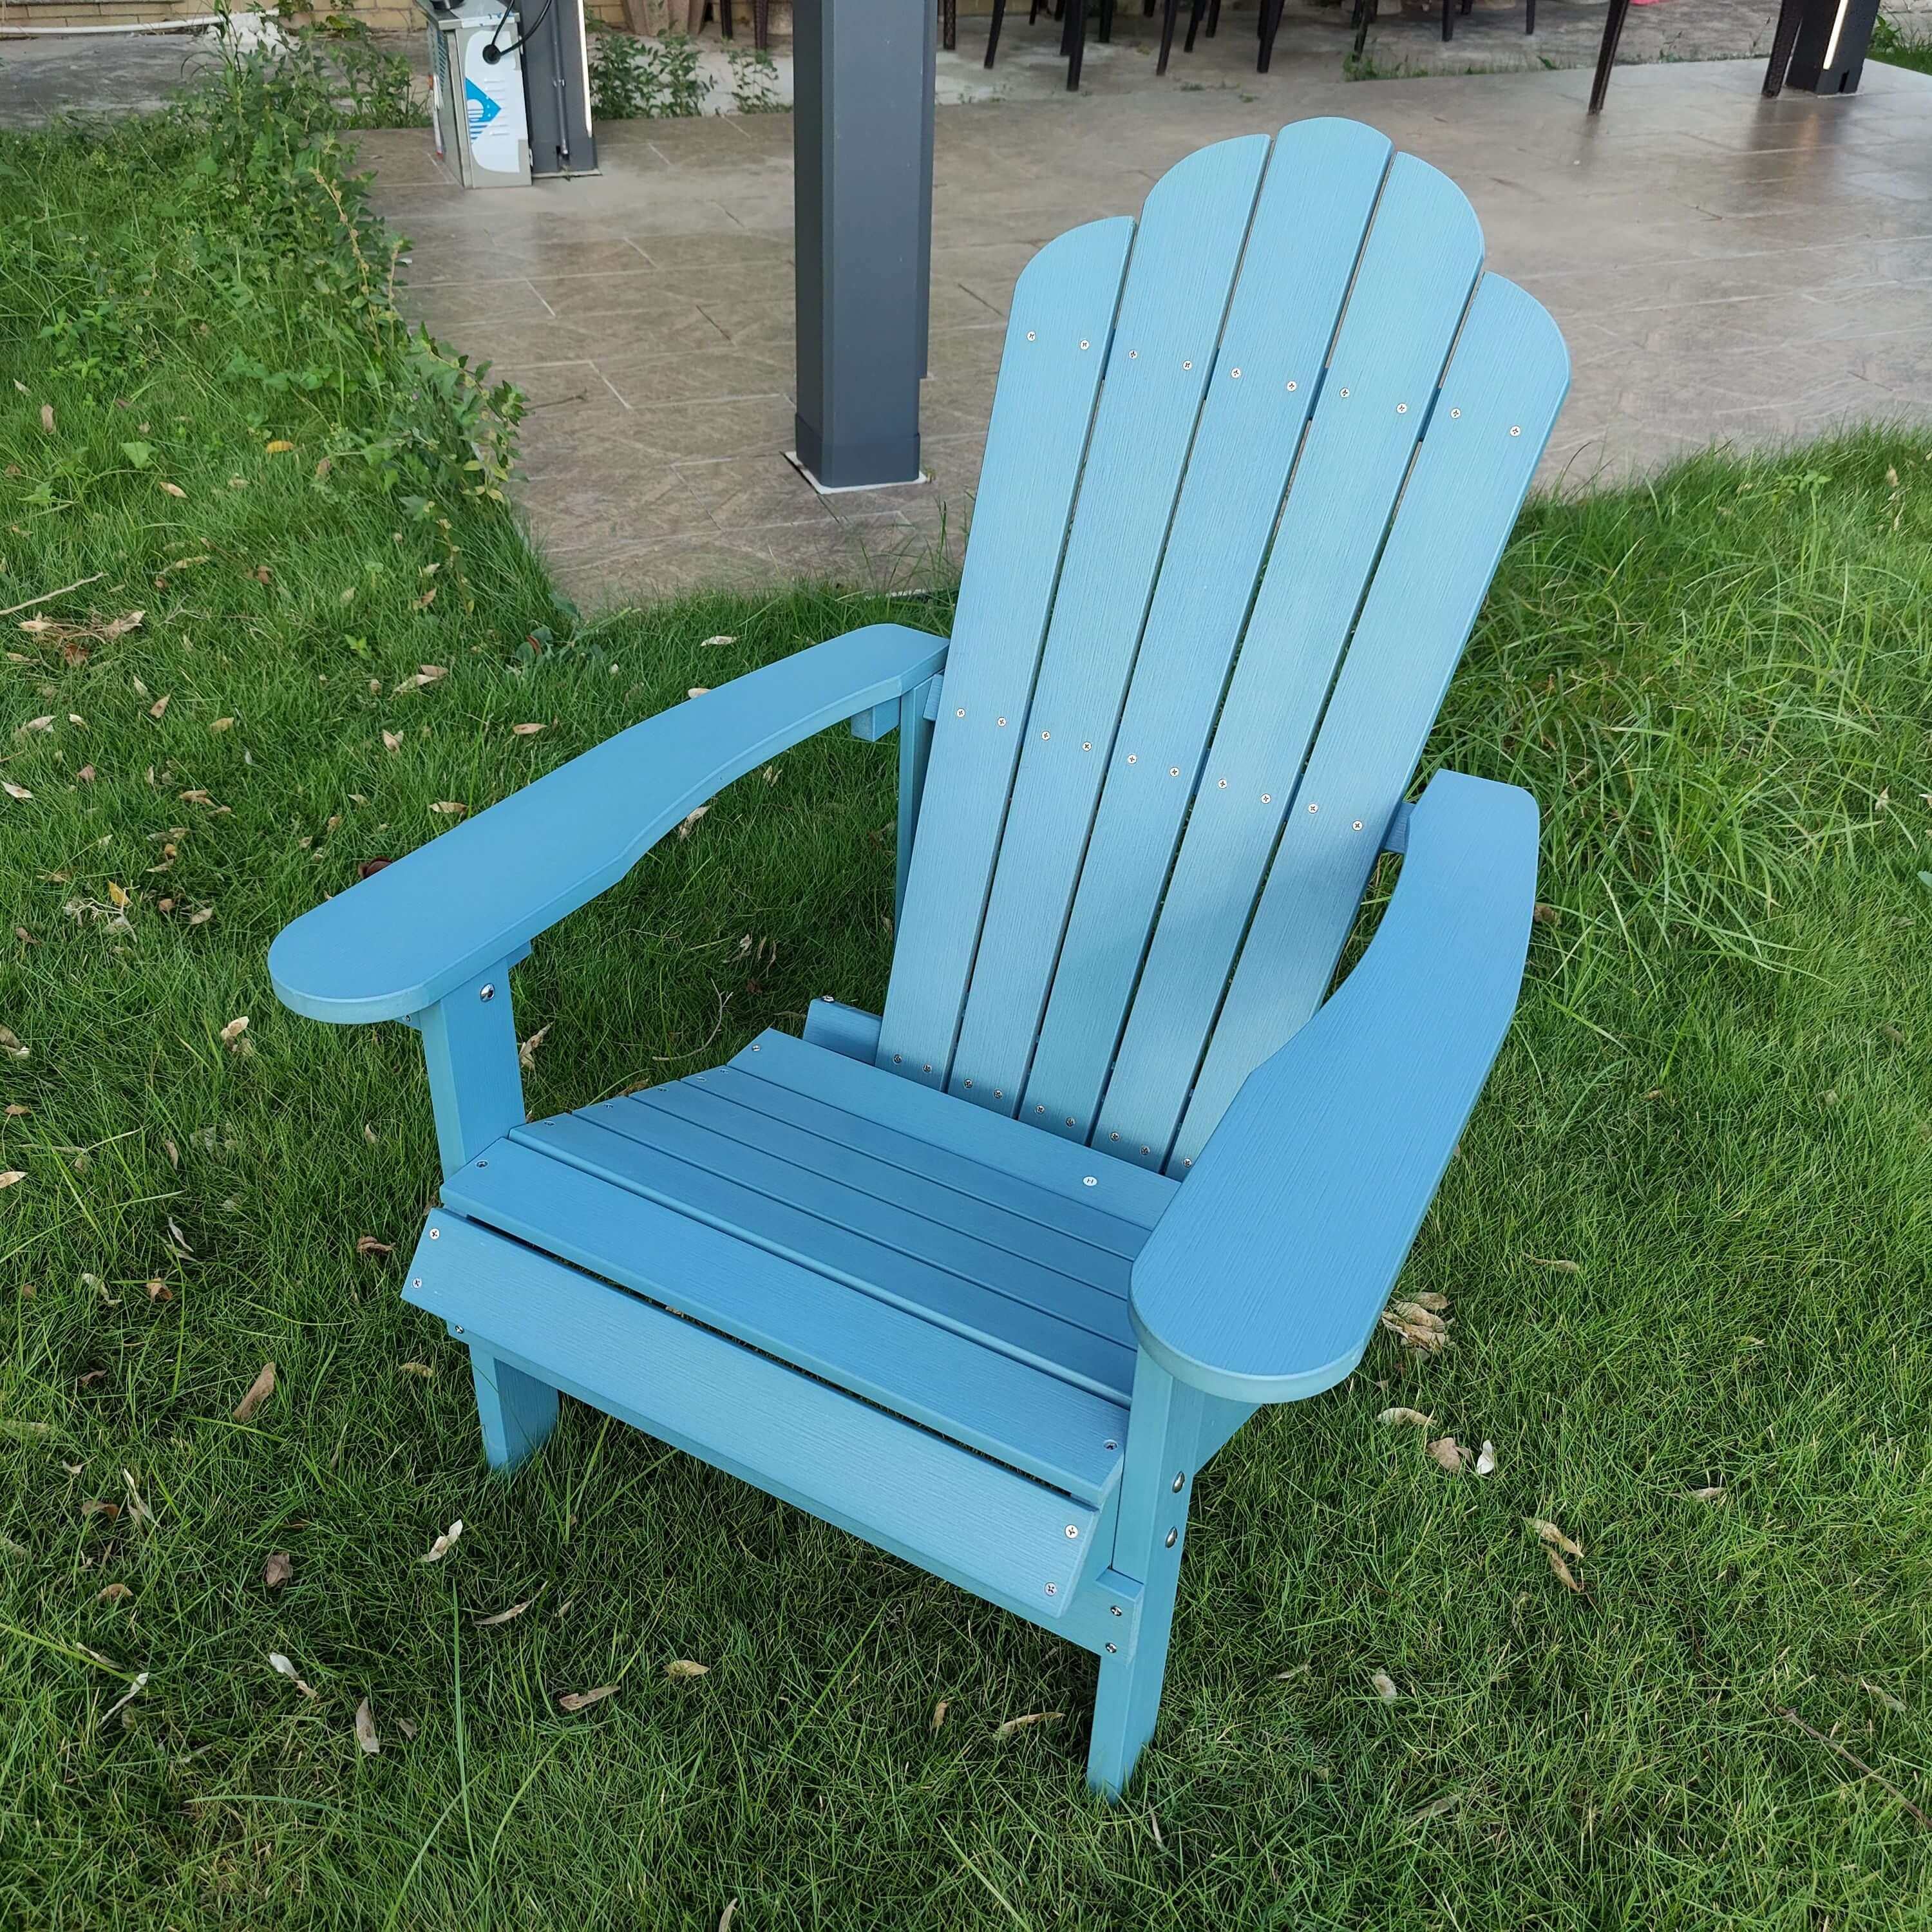 Why Are Adirondack Chairs Expensive?